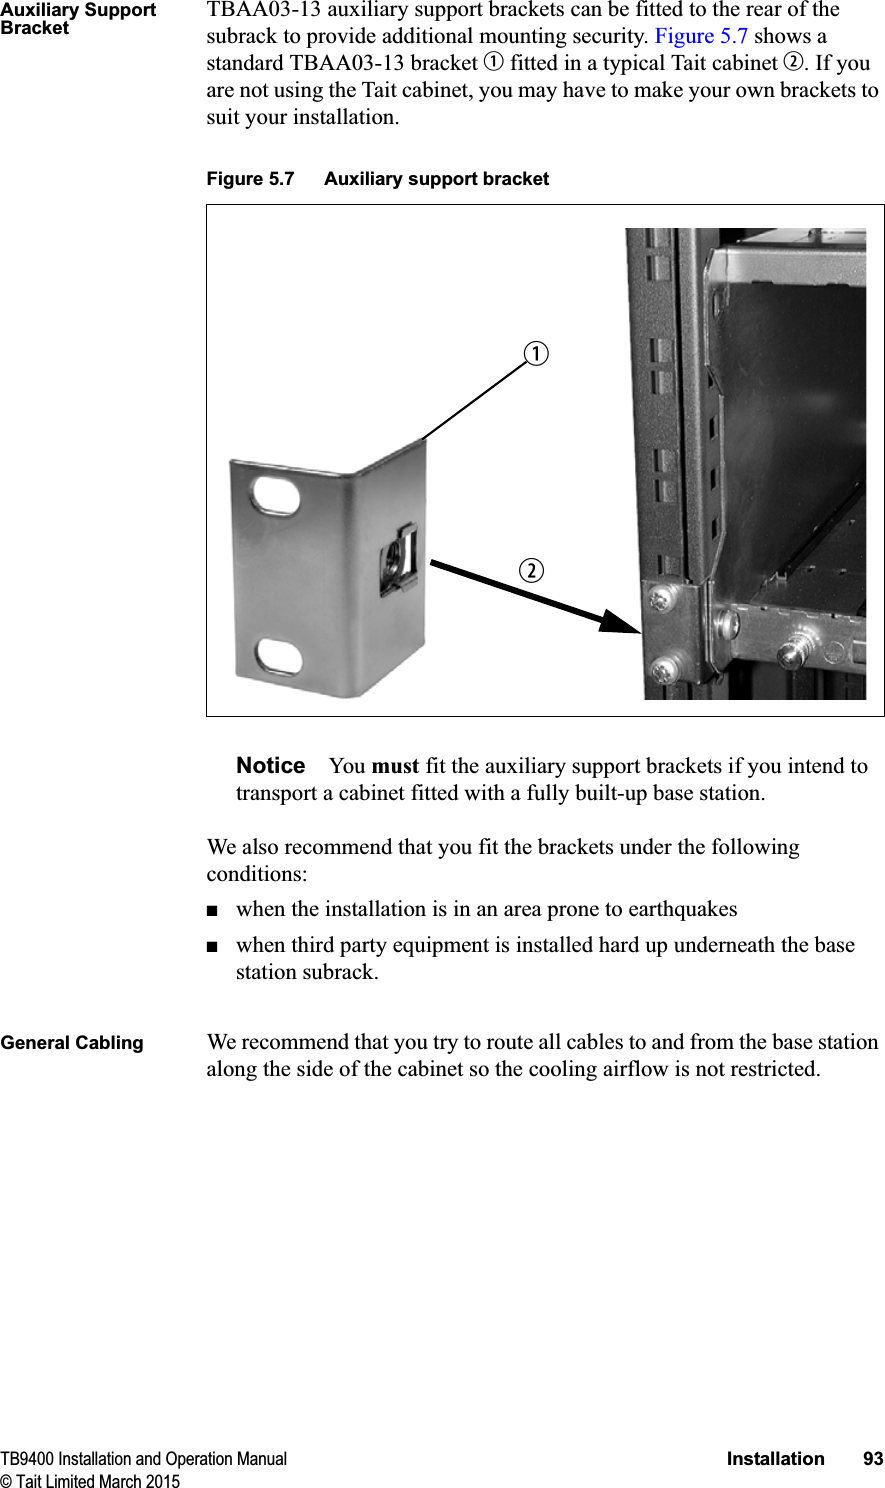 TB9400 Installation and Operation Manual Installation 93© Tait Limited March 2015Auxiliary Support BracketTBAA03-13 auxiliary support brackets can be fitted to the rear of the subrack to provide additional mounting security. Figure 5.7 shows a standard TBAA03-13 bracket b fitted in a typical Tait cabinet c. If you are not using the Tait cabinet, you may have to make your own brackets to suit your installation.Notice You  must fit the auxiliary support brackets if you intend to transport a cabinet fitted with a fully built-up base station.We also recommend that you fit the brackets under the following conditions:■when the installation is in an area prone to earthquakes■when third party equipment is installed hard up underneath the base station subrack.General Cabling We recommend that you try to route all cables to and from the base station along the side of the cabinet so the cooling airflow is not restricted.Figure 5.7 Auxiliary support bracketcb